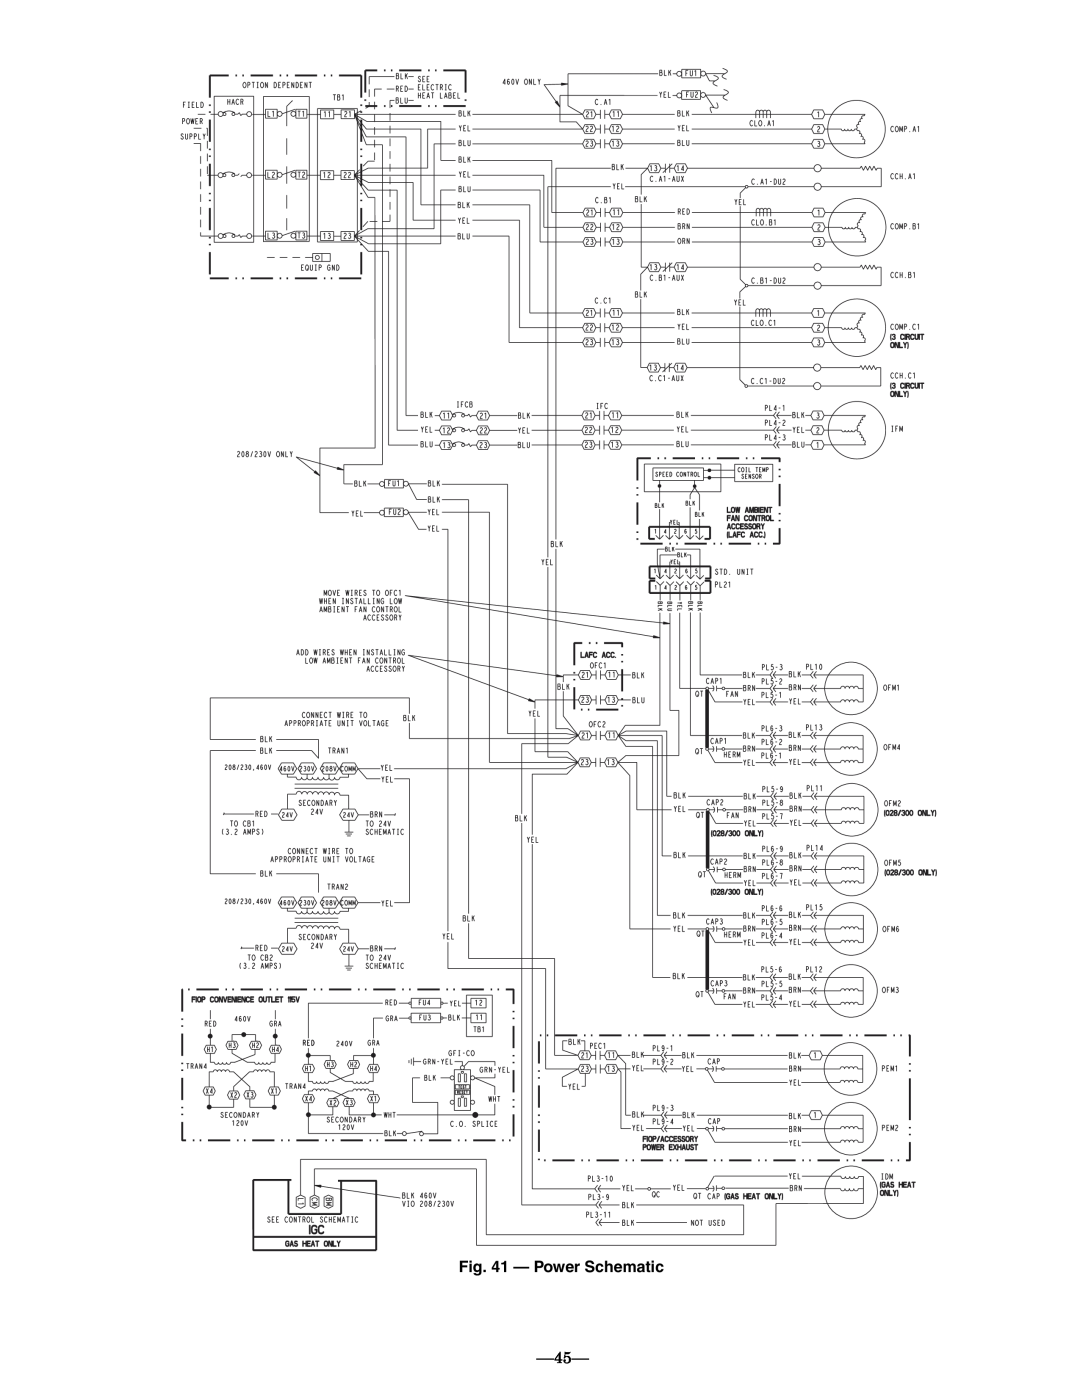 Bryant 581A operation manual Power Schematic 